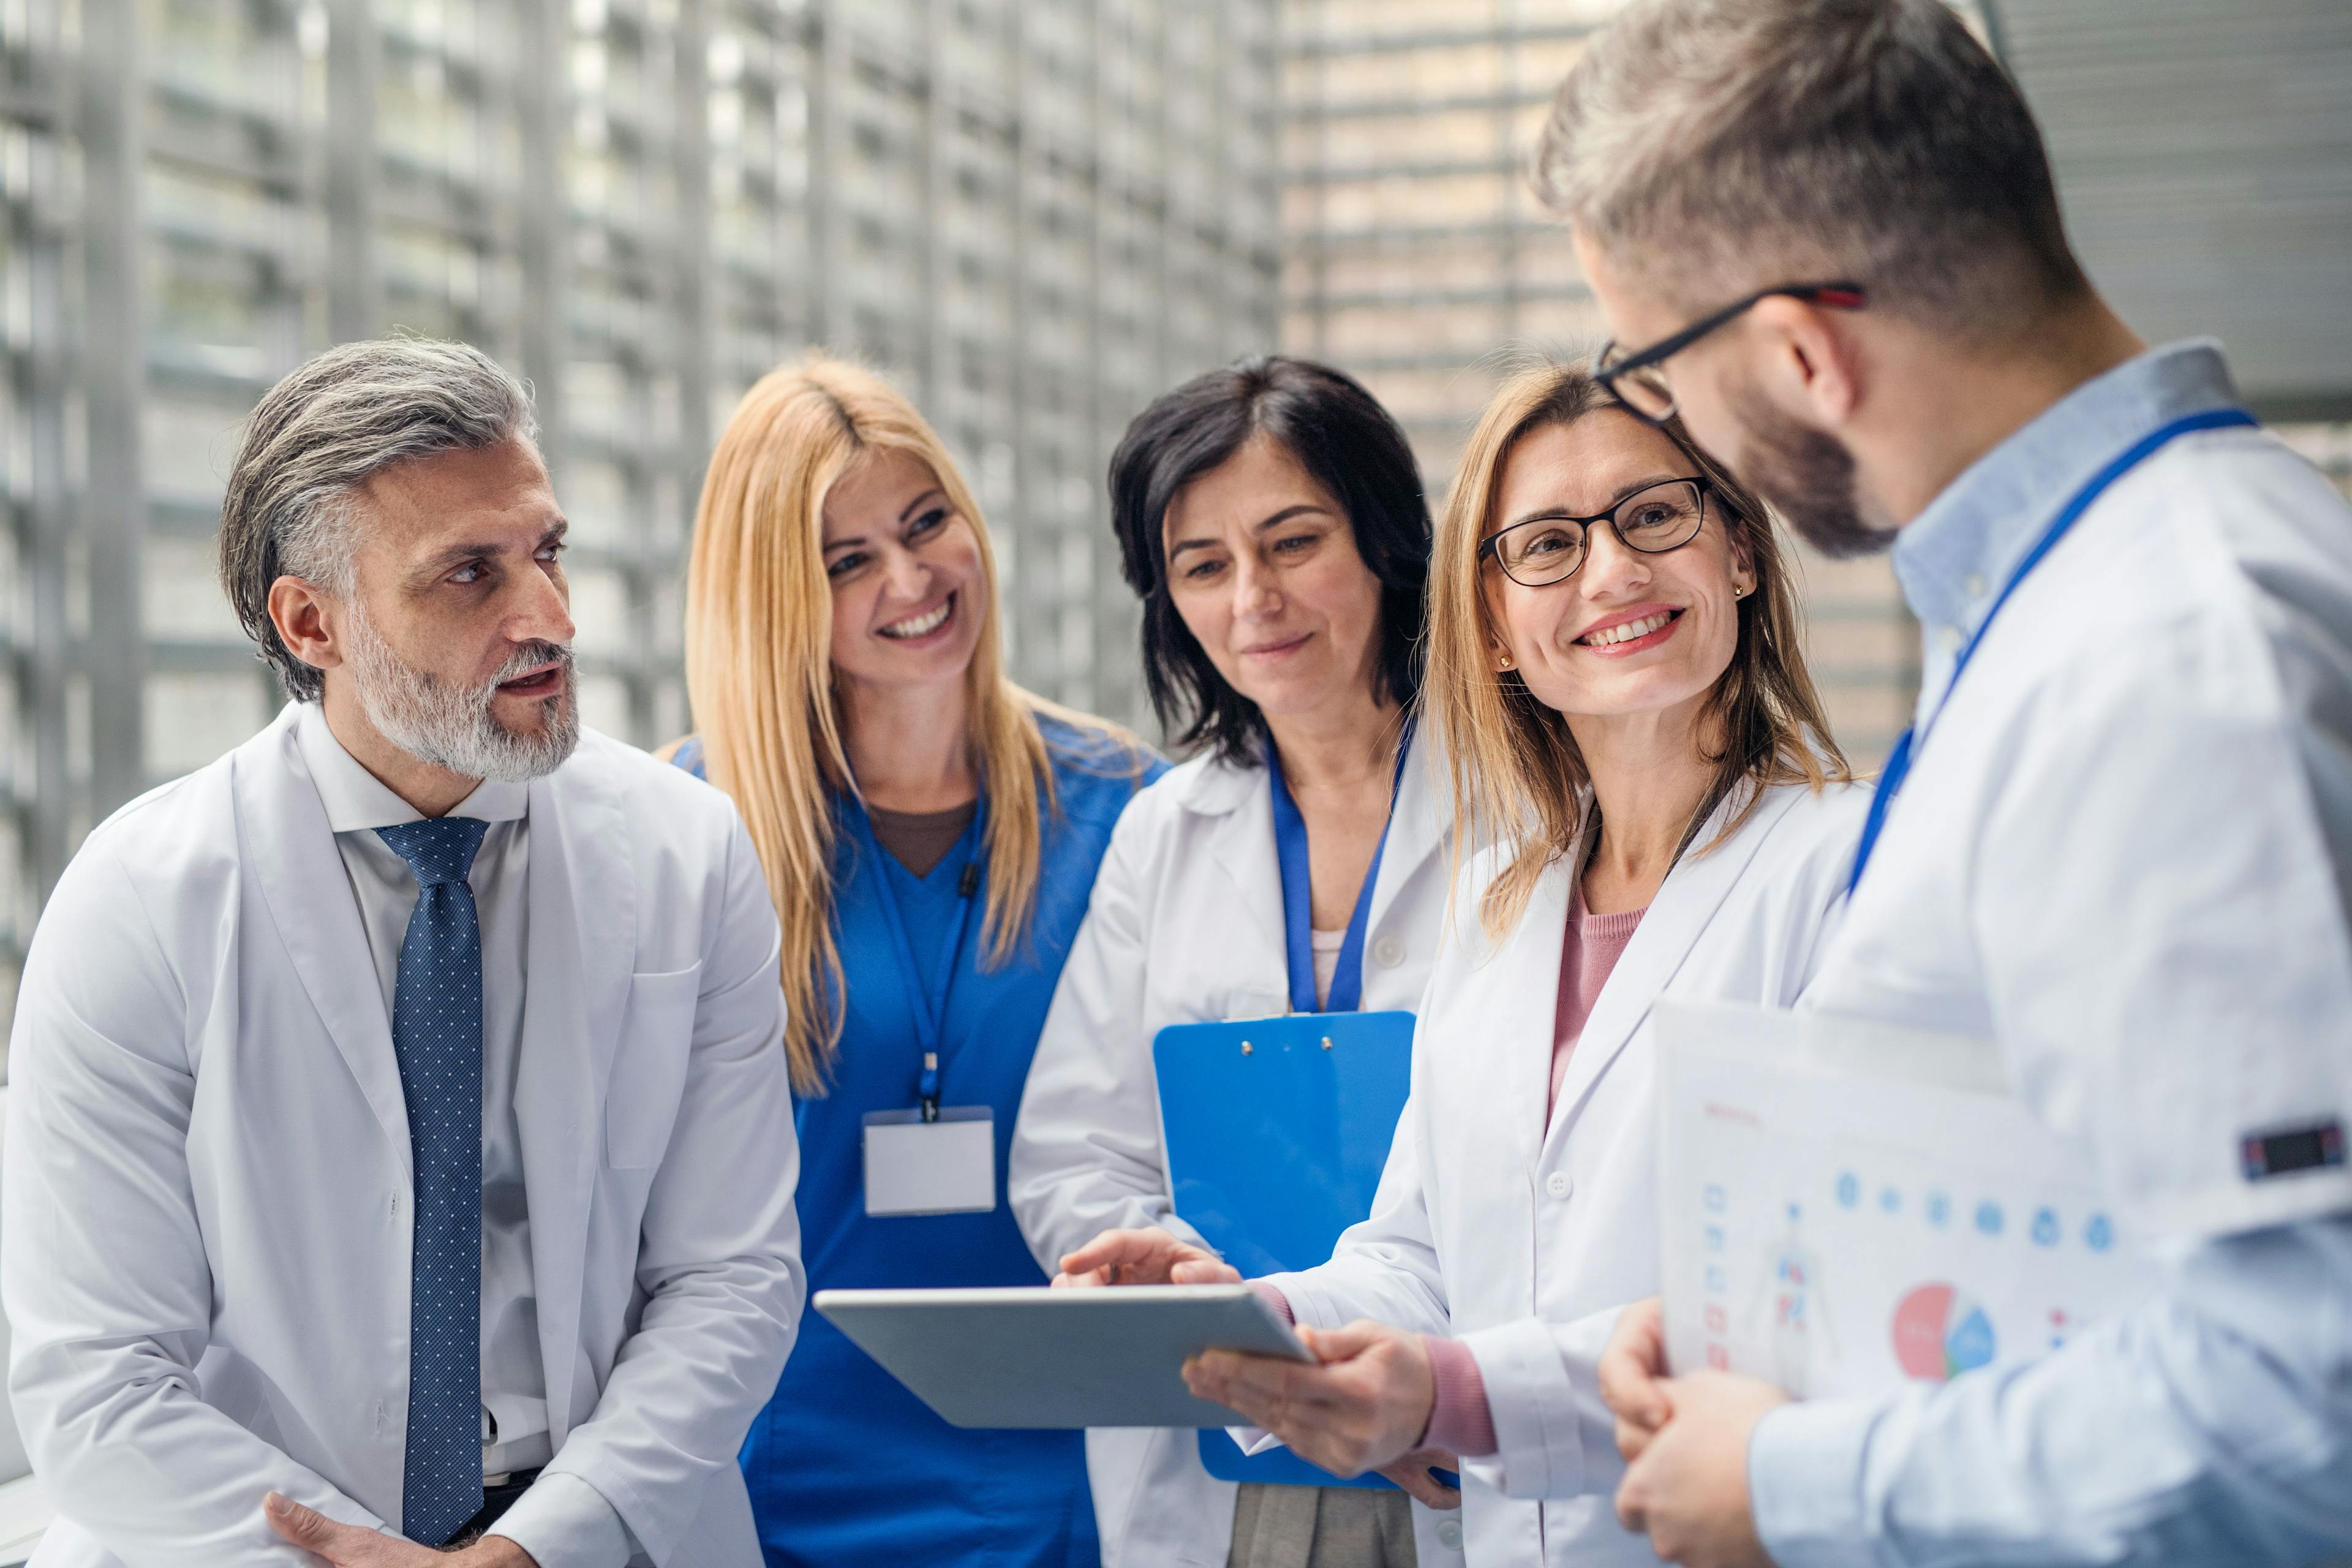 Here’s how the Academy of Organizational and Occupational Psychiatry can help you connect with your fellow psychiatrists about complex mental health issues in the workplace.